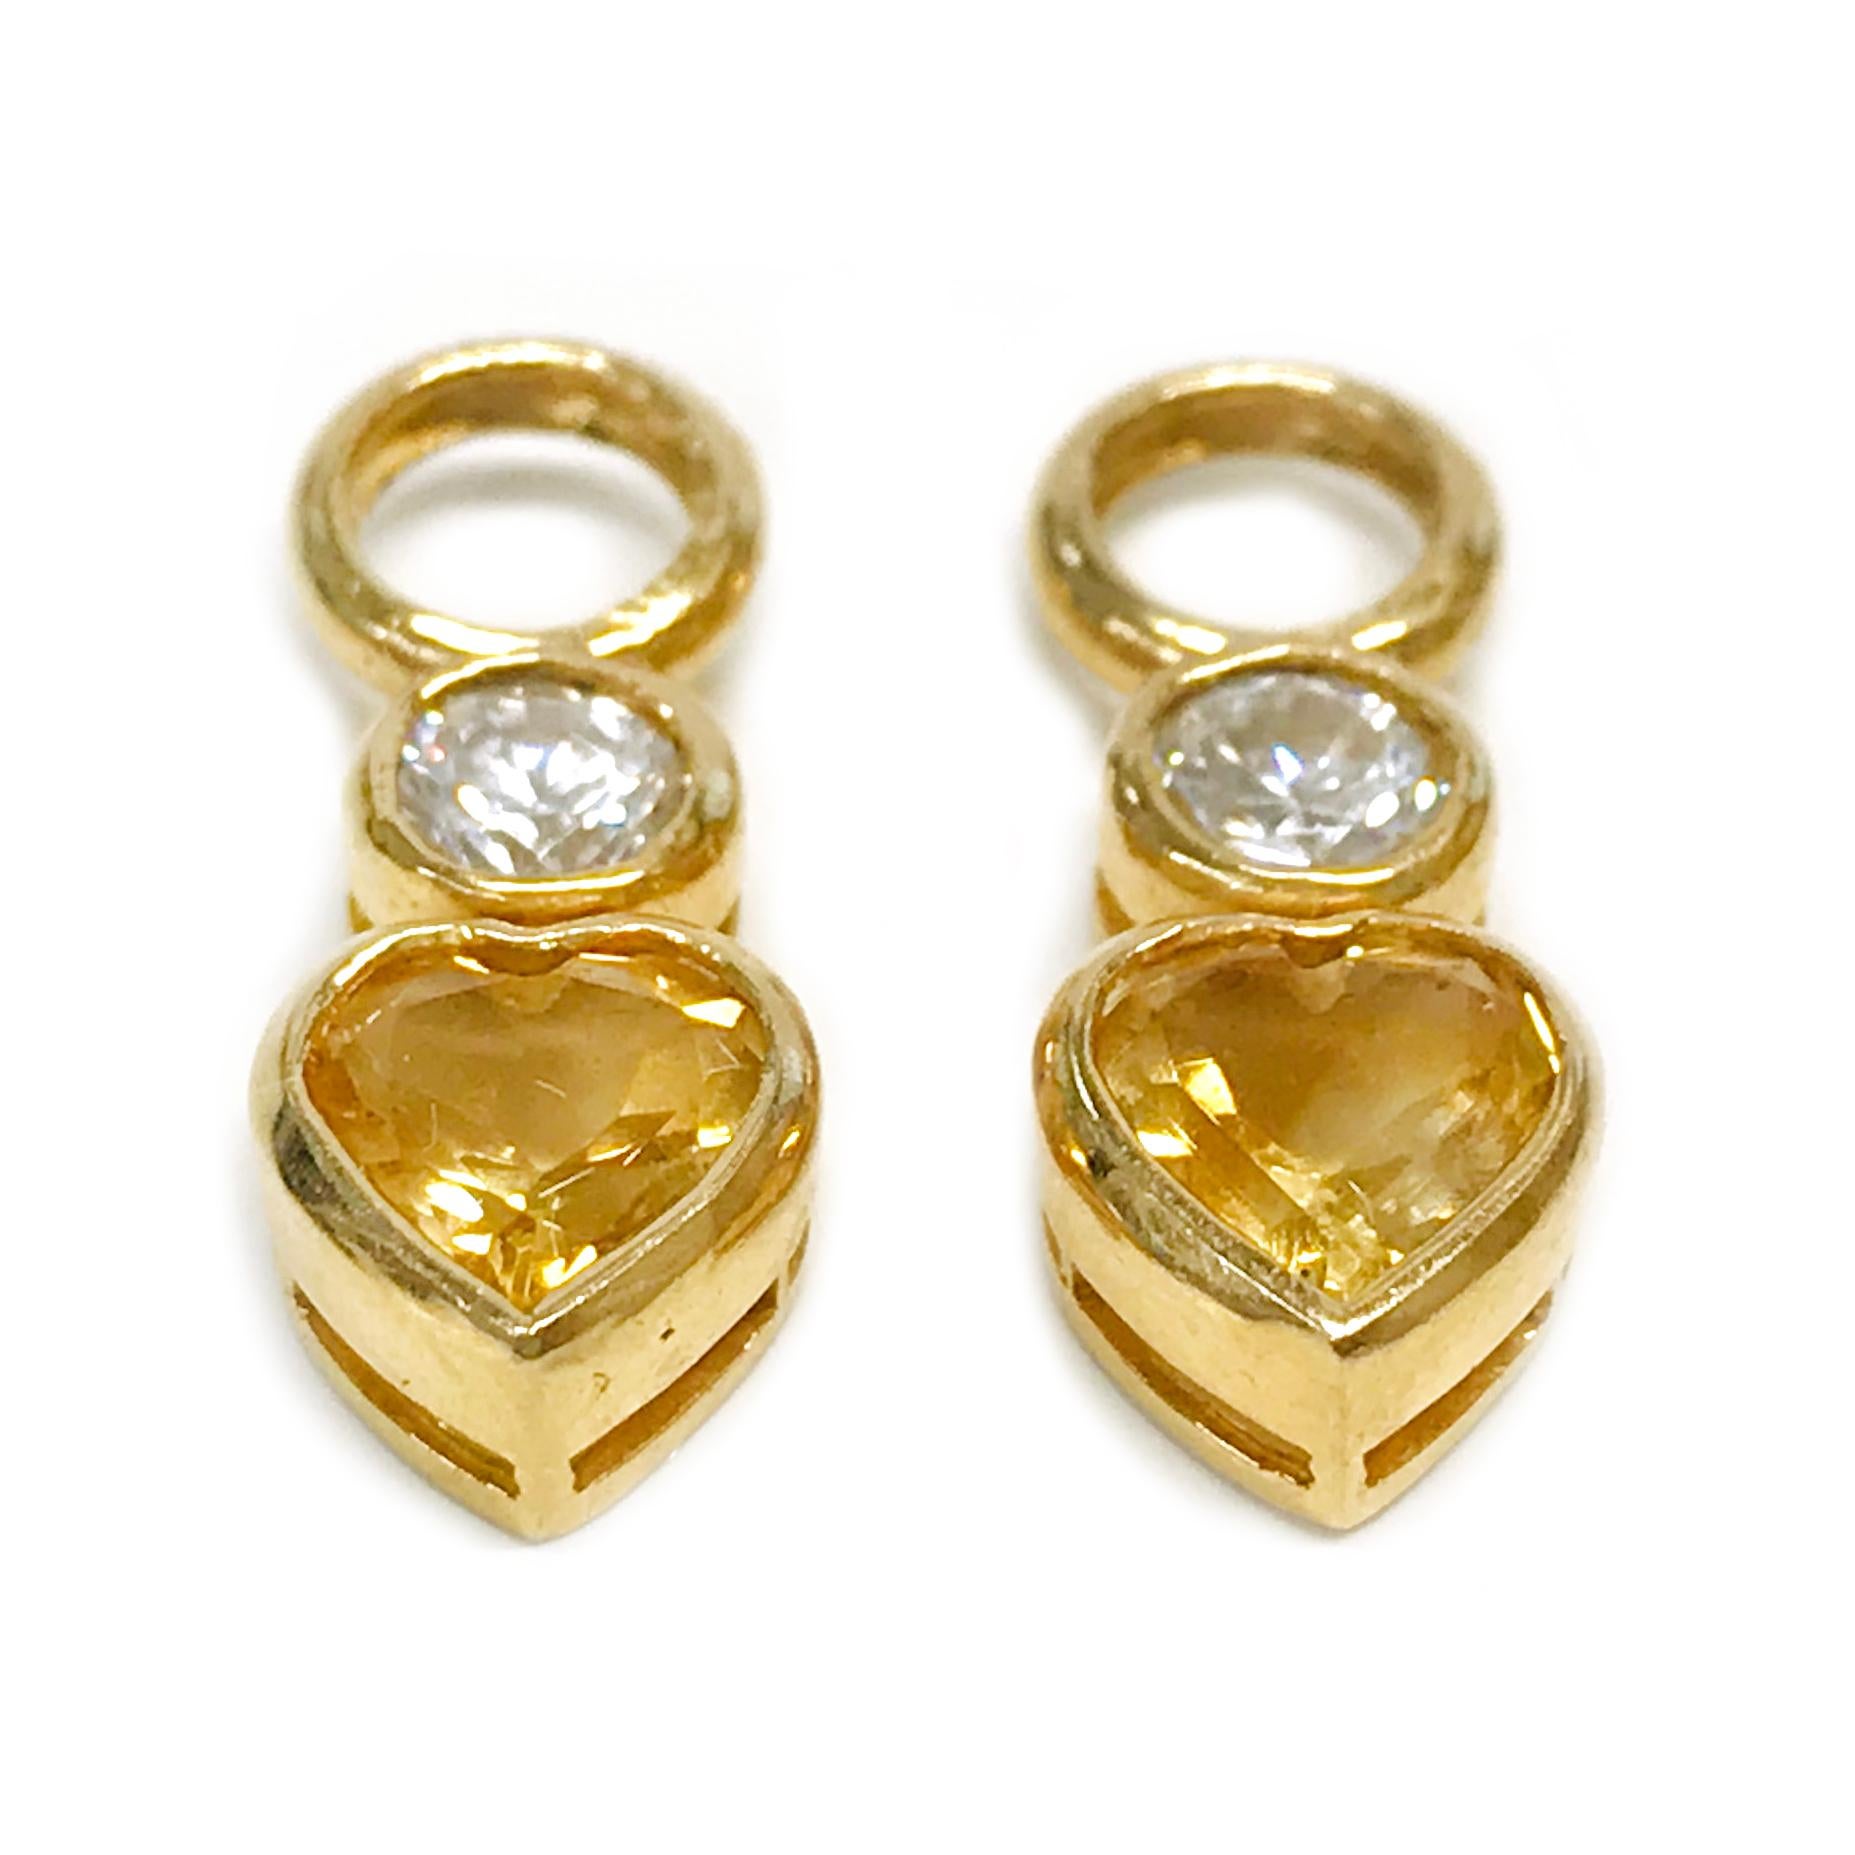 14 Karat Yellow Topaz Earring Jackets. These earring jackets consist of three bezels set vertically. The top bezel is round and open to place in hoop earrings, the second is a smaller round bezel with a round 4.2mm quartz stone and the last is a